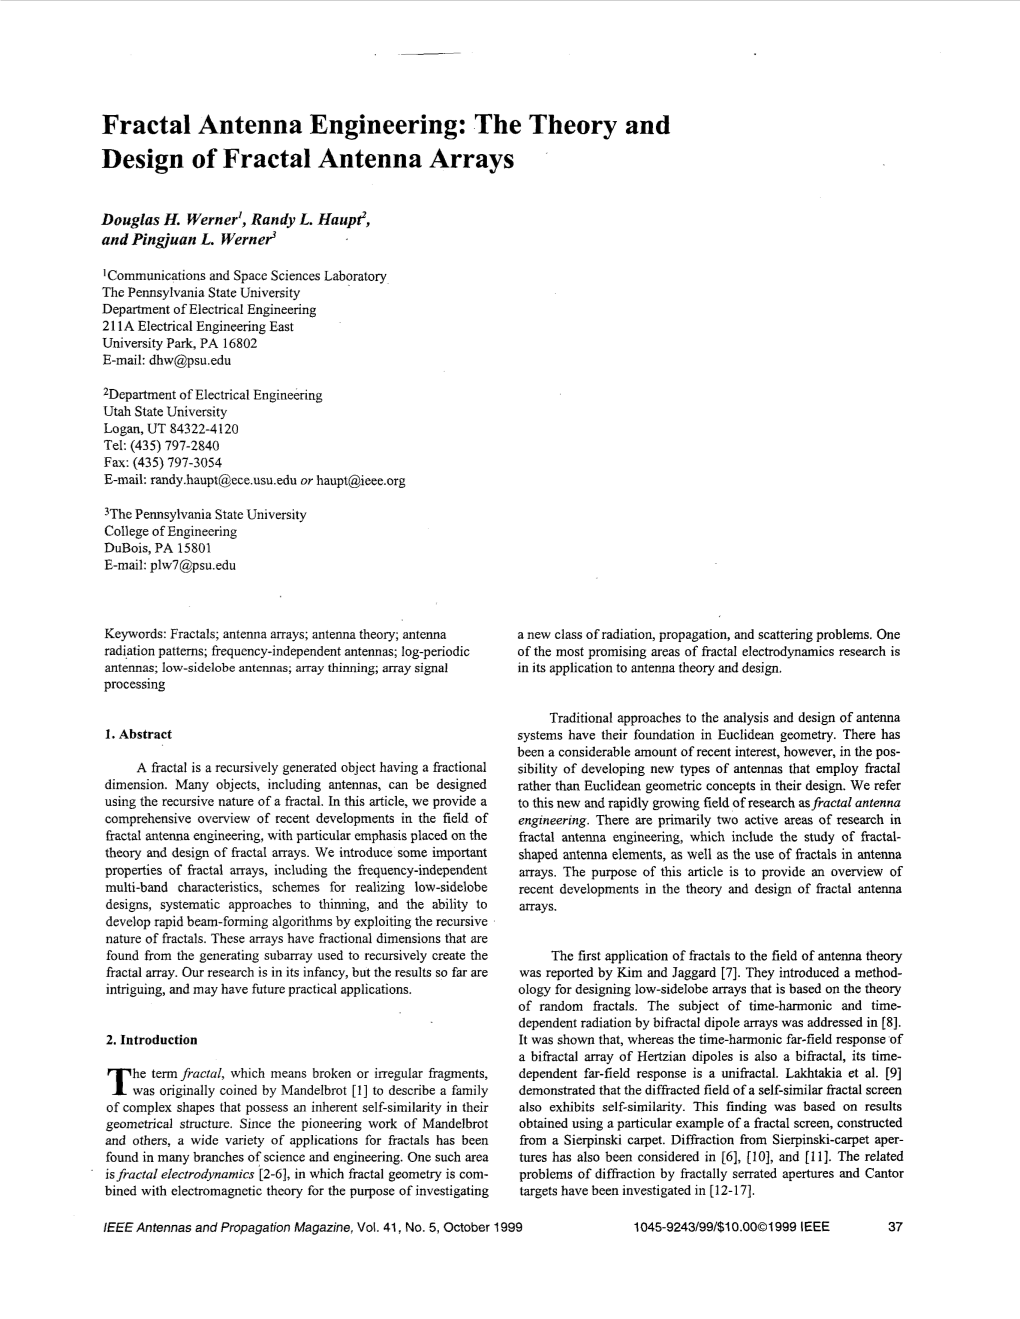 Fractal Antenna Engineering: the Theory and Design of Fractal Antenna Arrays